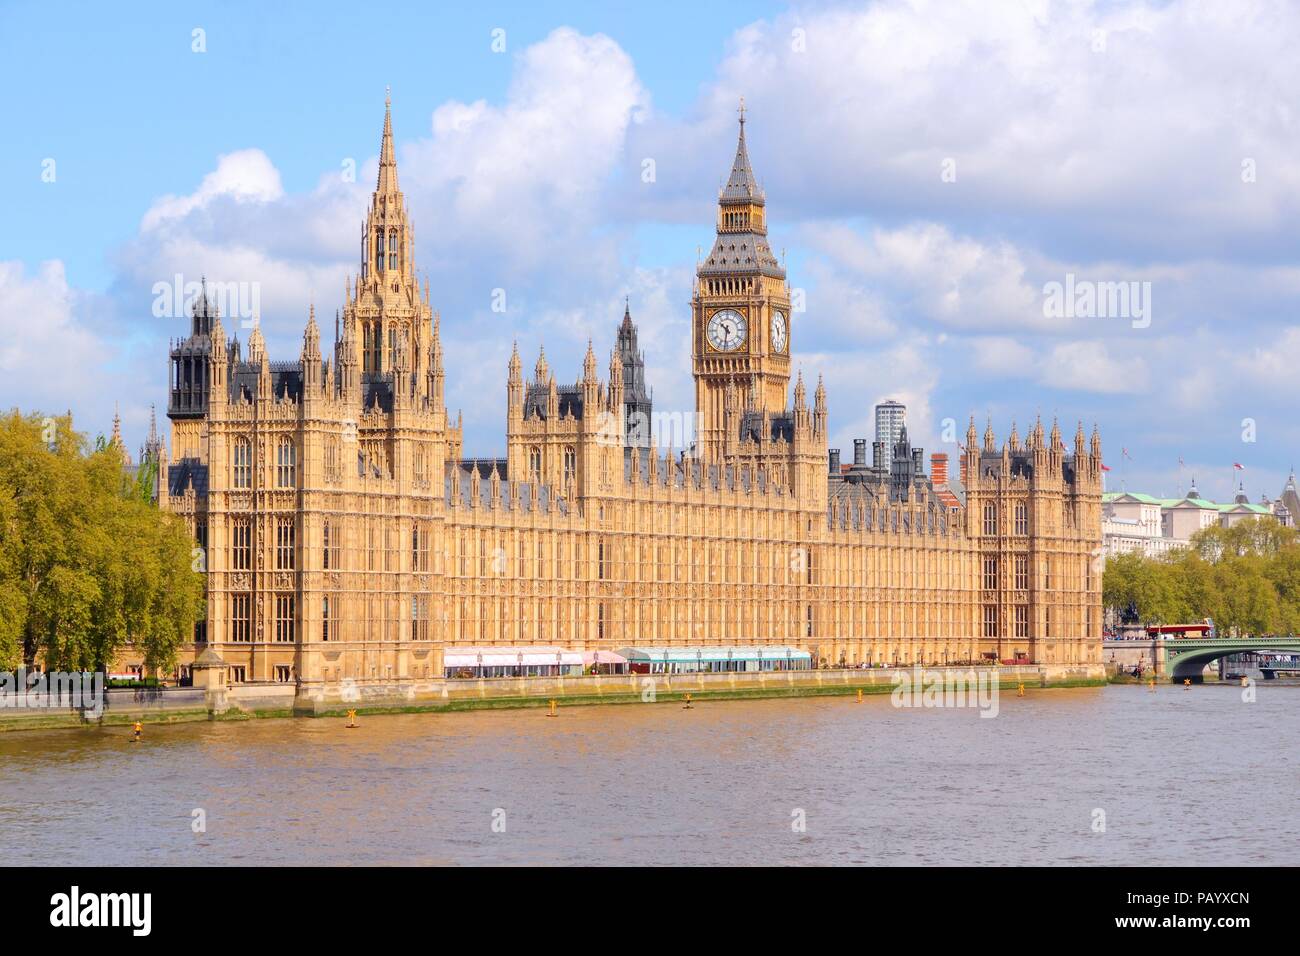 London, United Kingdom - Palace of Westminster (Houses of Parliament) with Big Ben clock tower. UNESCO World Heritage Site. Stock Photo